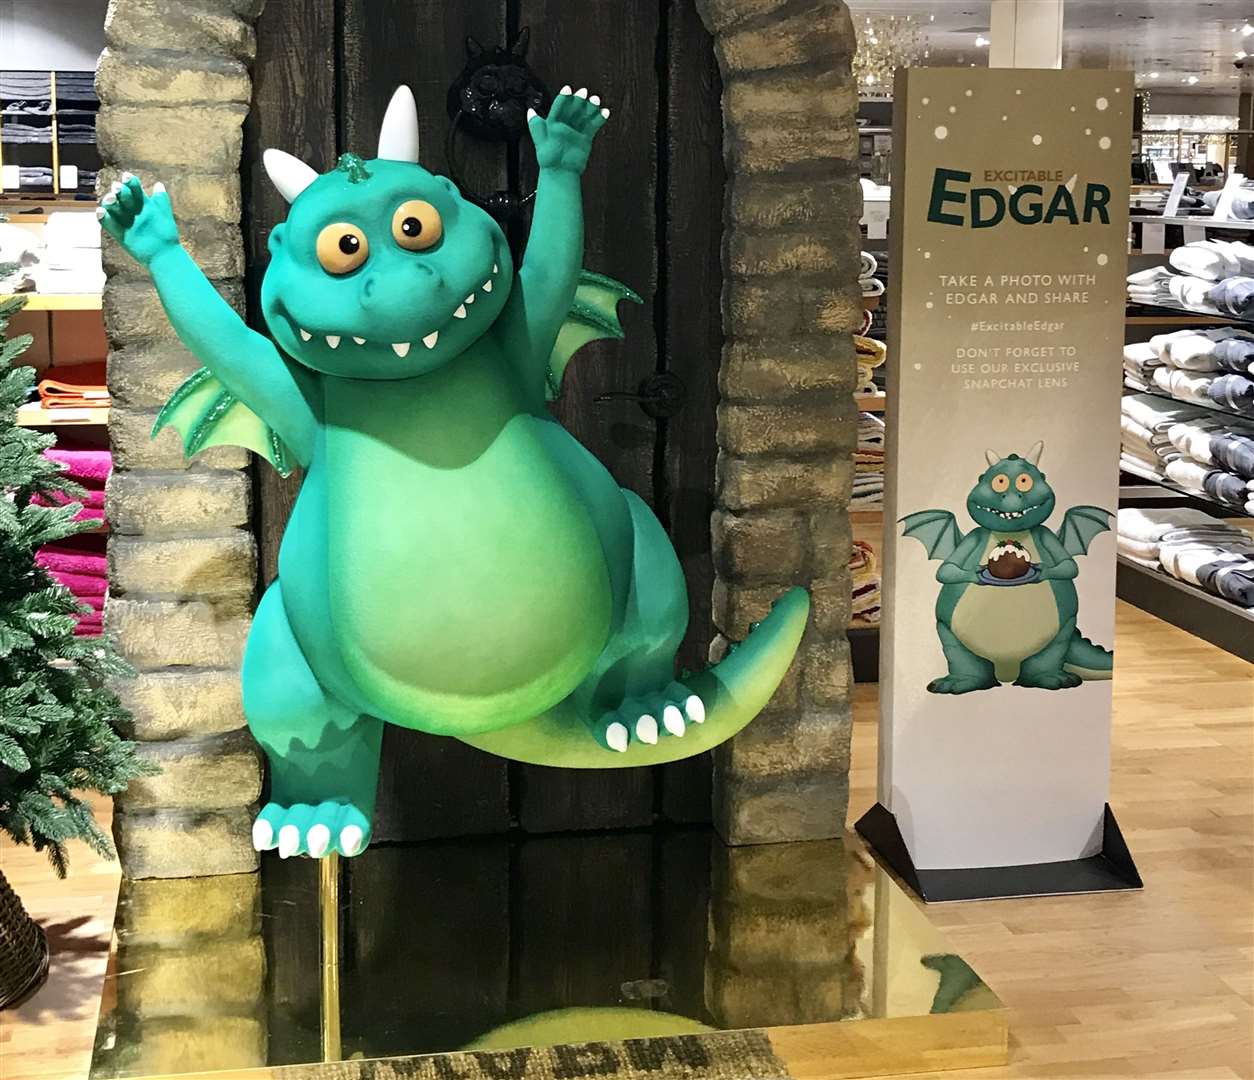 Take the kids to have their photo taken with Edgar at John Lewis in Bluewater